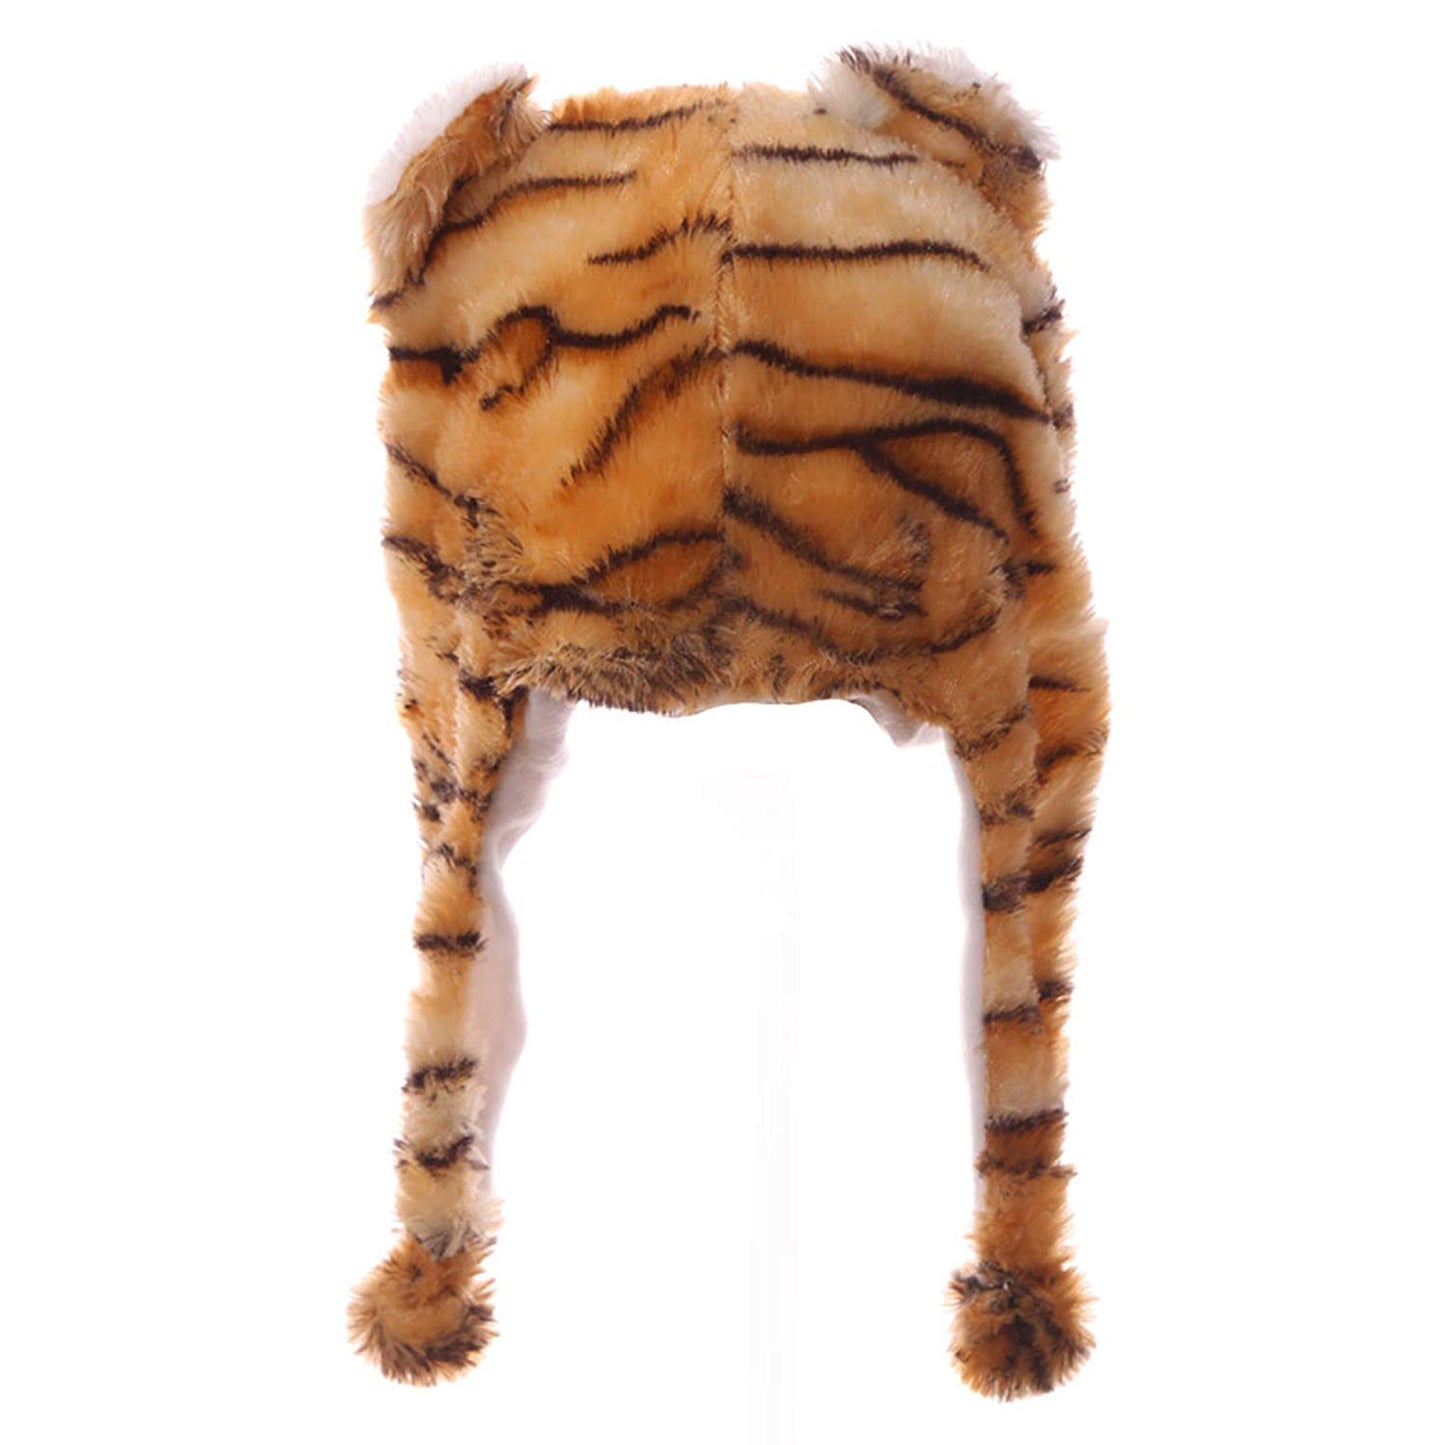 Wild Woolies Character Hats - Super Plush and Soft (TIGER) - hanrattycraftsgifts.co.uk